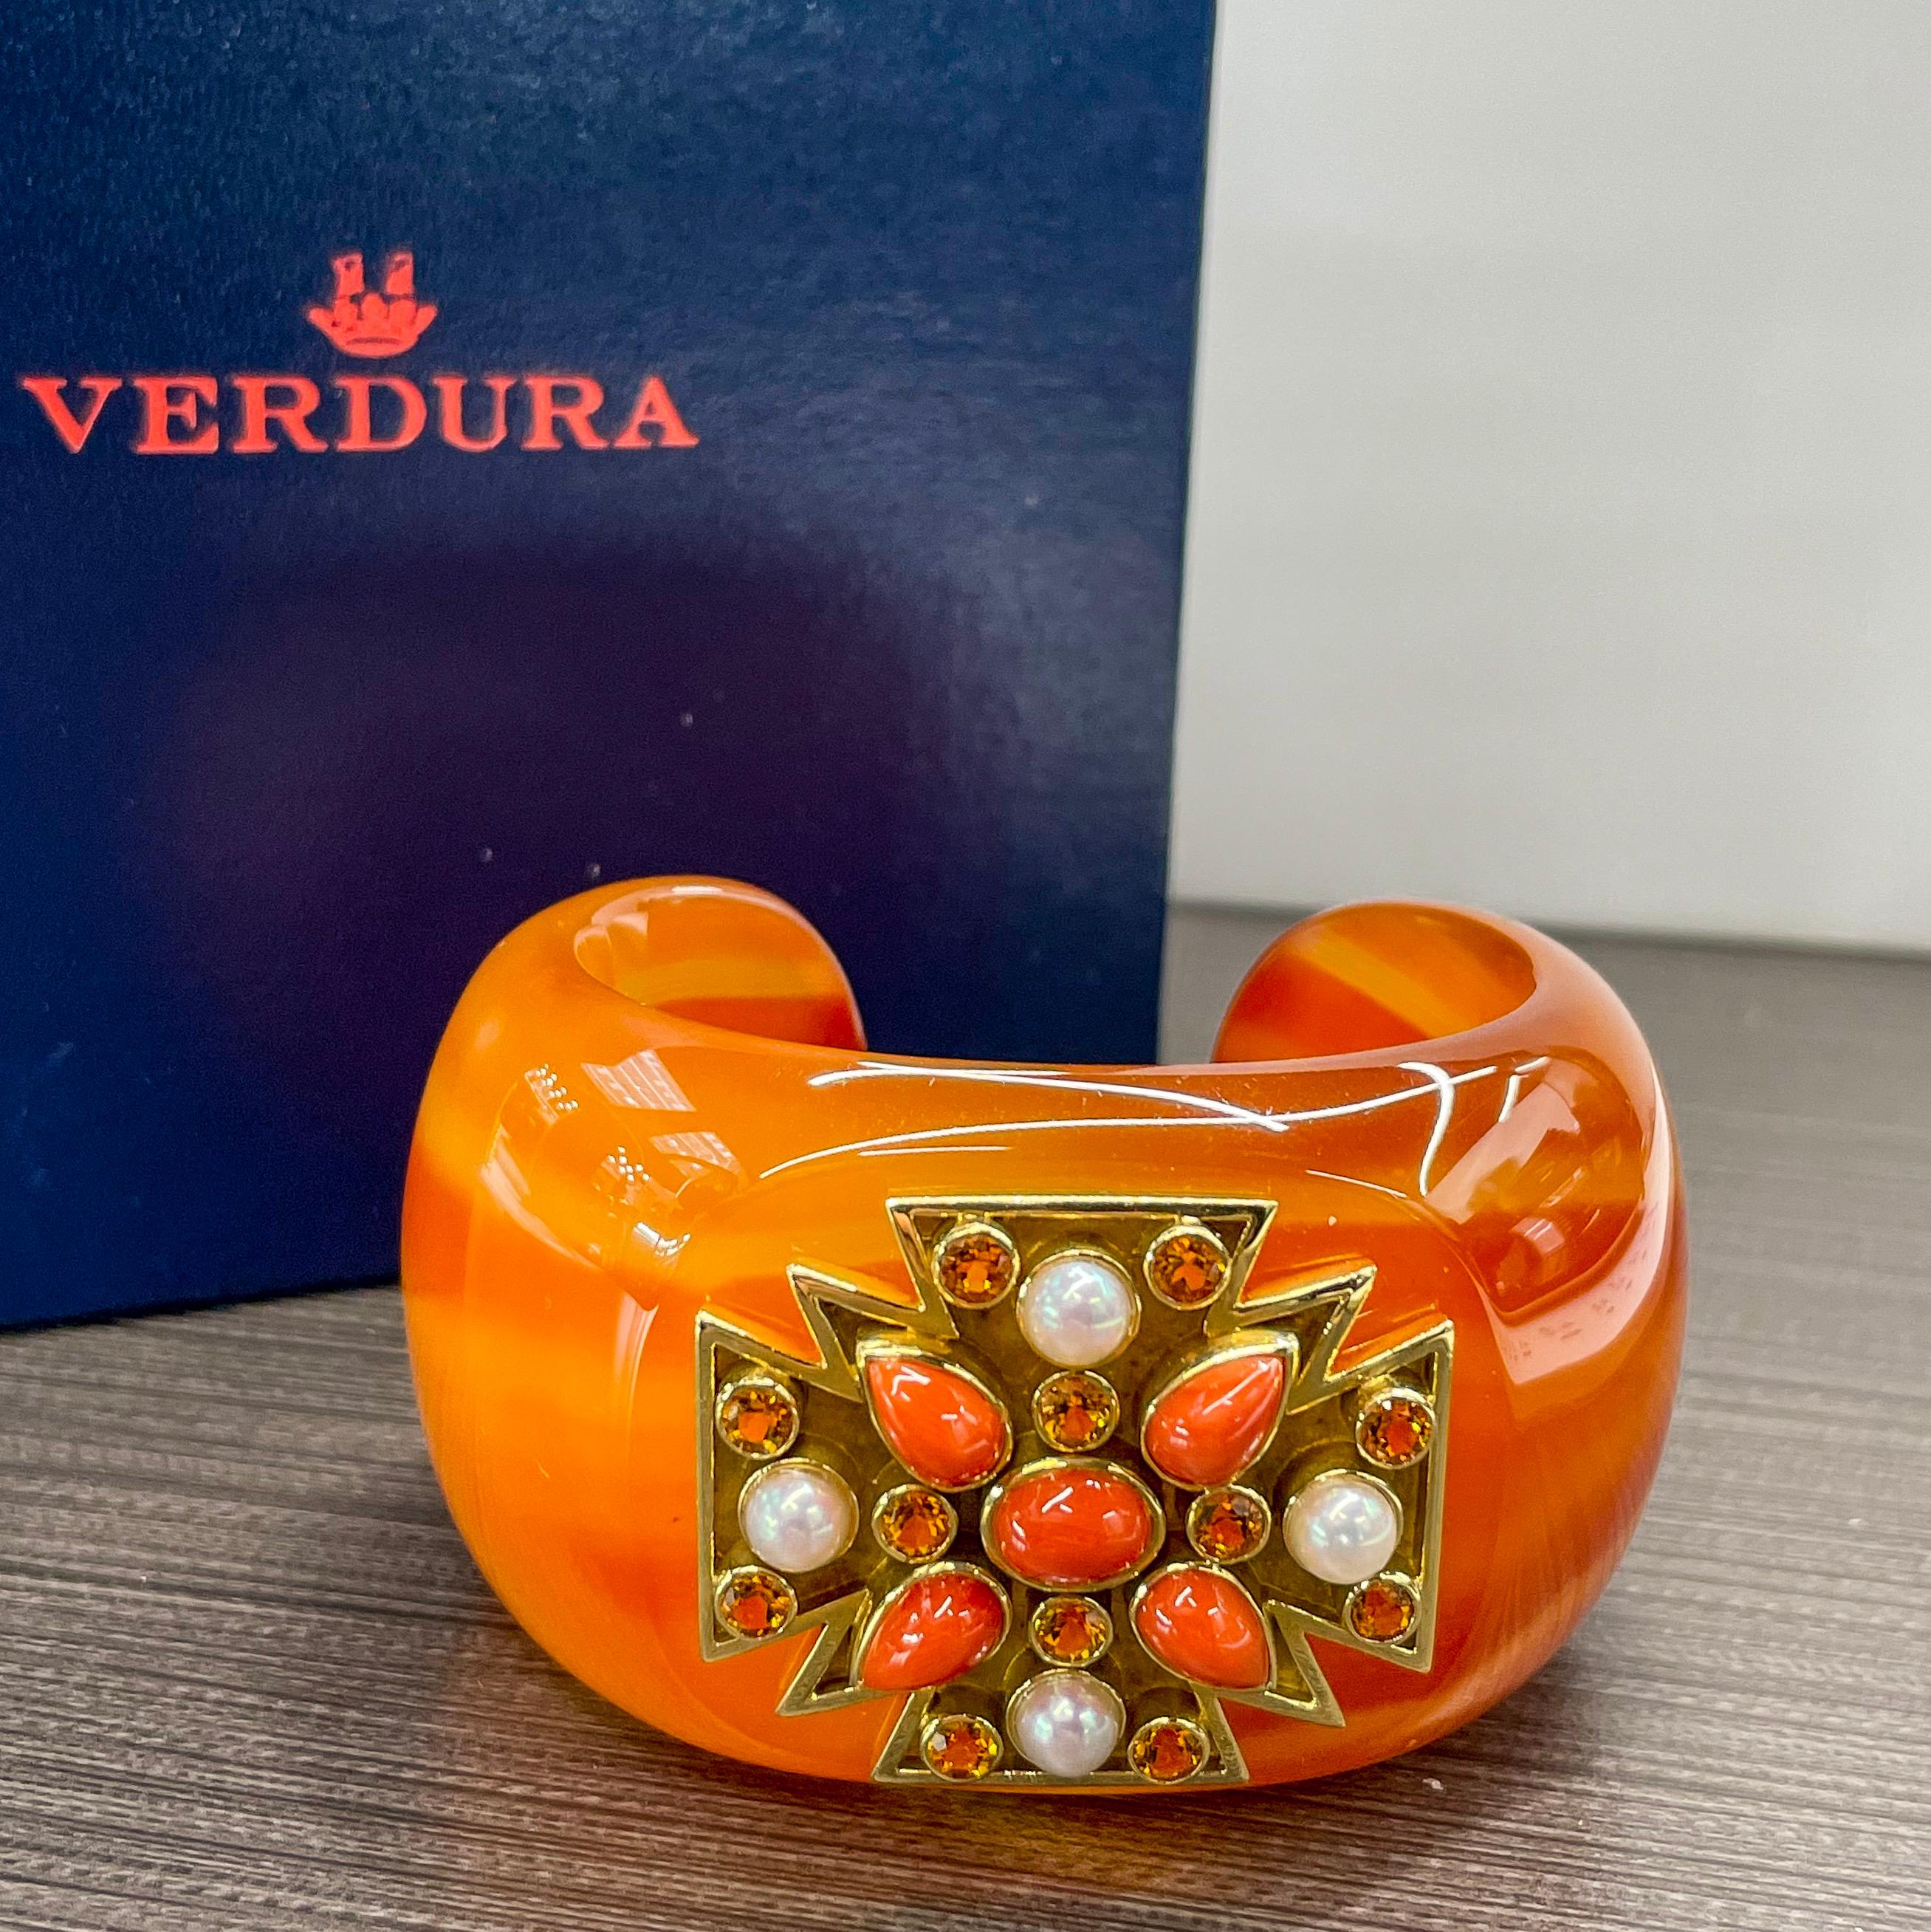 Verdura 18K Yellow Gold Carved Agate, Coral, Pearl Bracelet 5